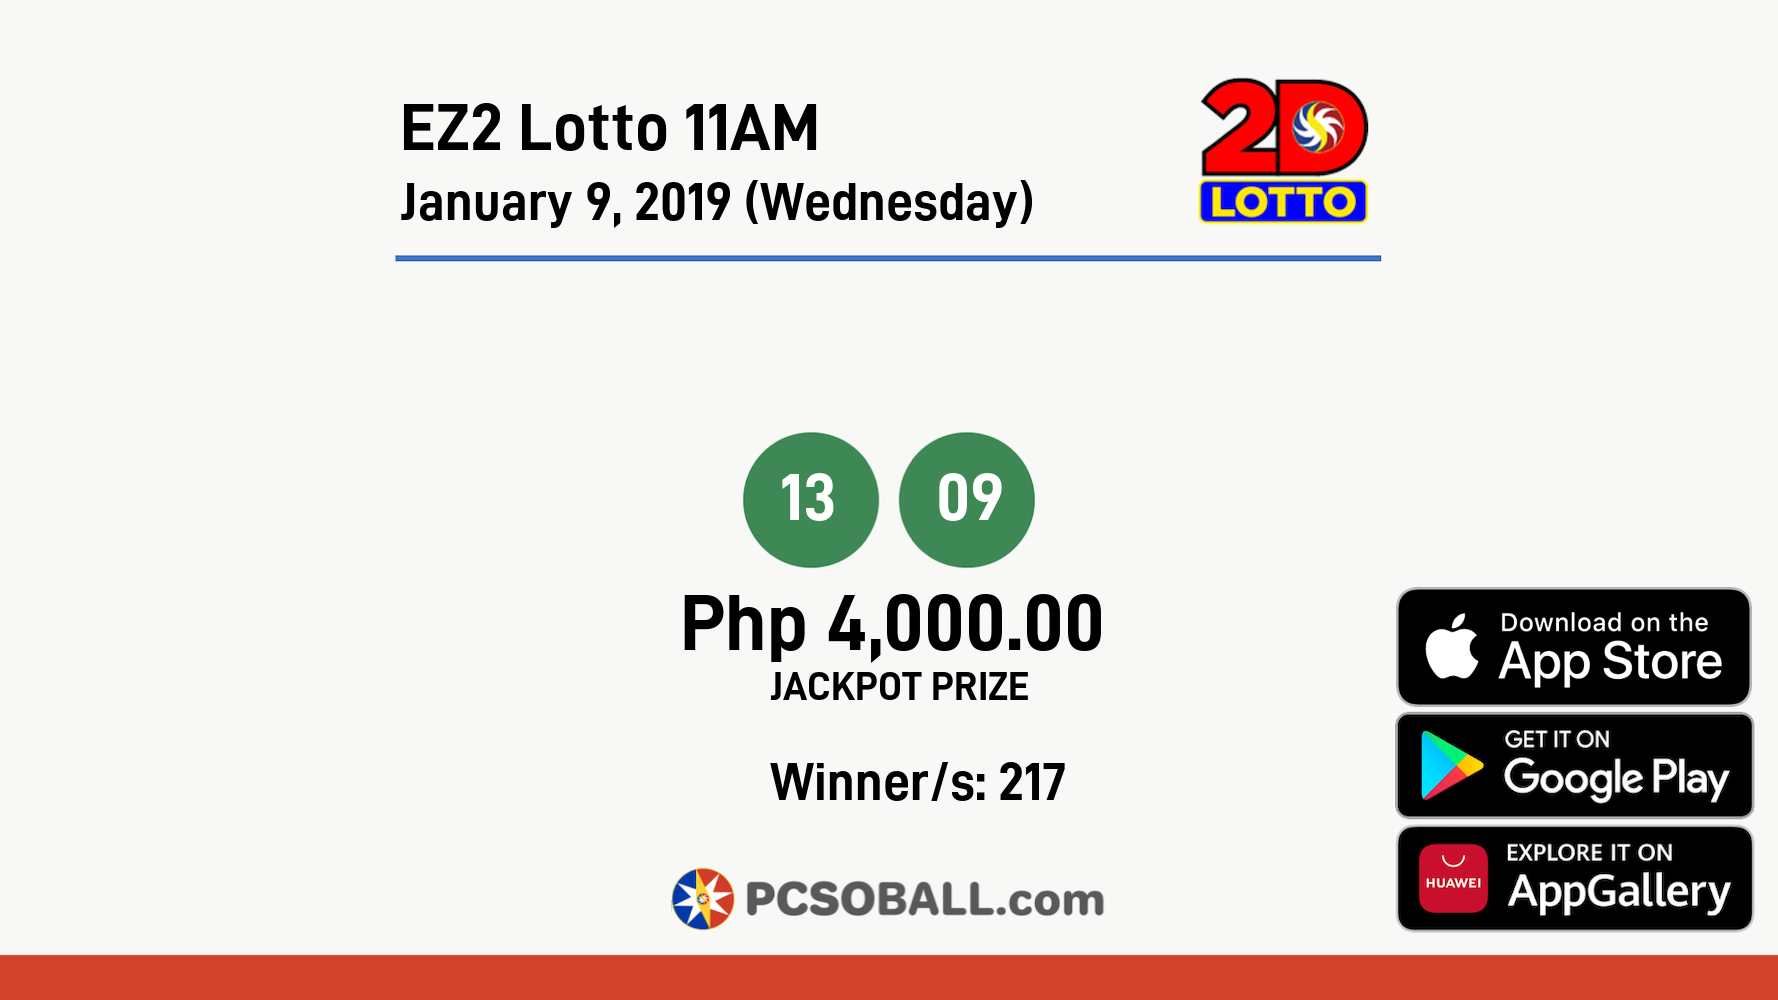 EZ2 Lotto 11AM January 9, 2019 (Wednesday) Result